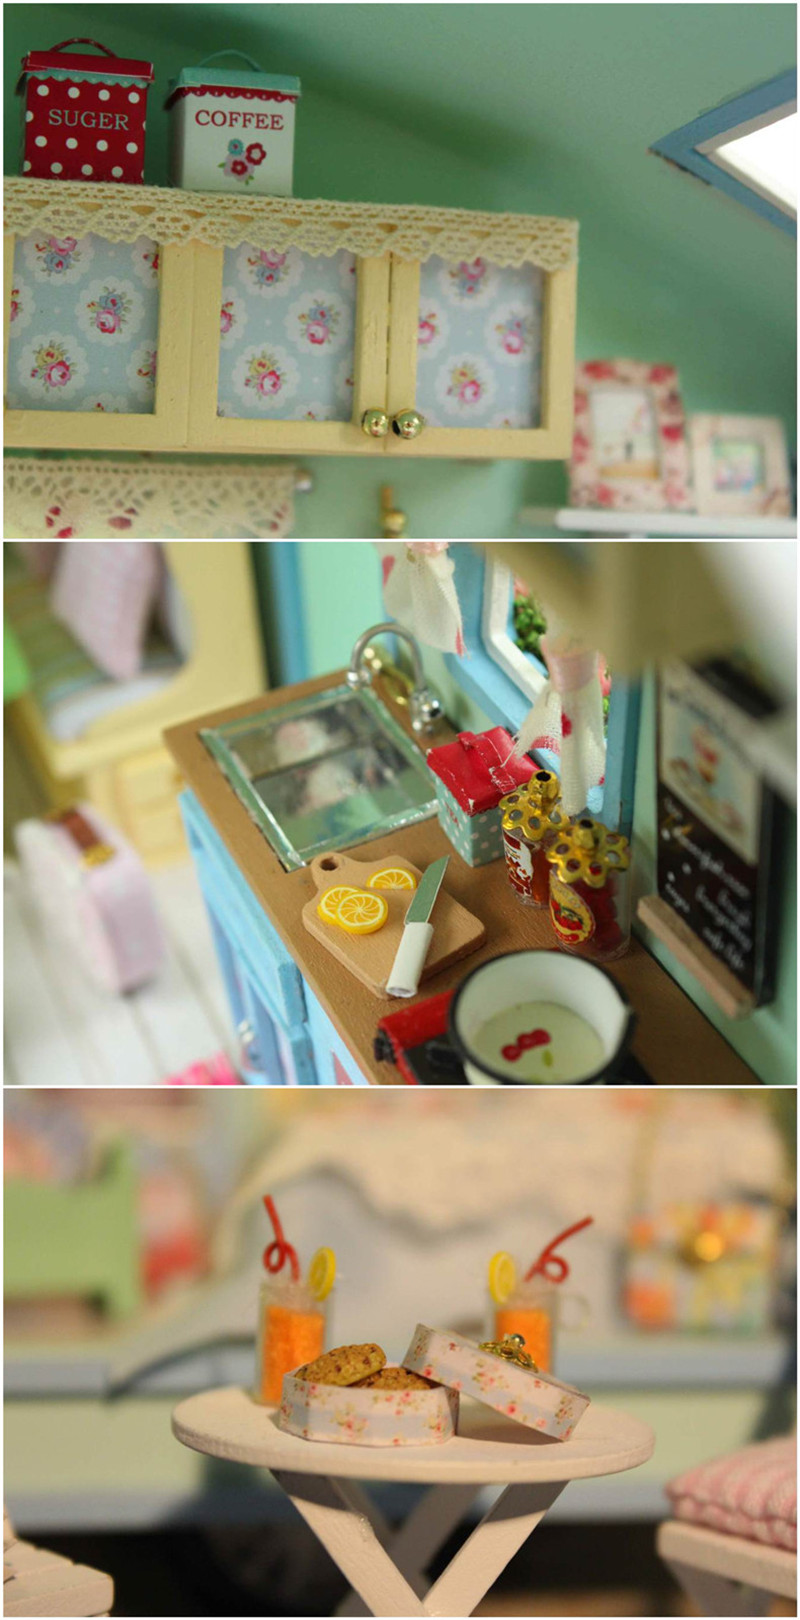 CuteRoom-A-016-Time-Travel-DIY-Wooden-Dollhouse-Miniature-Kit-Doll-house-LED-Music-Voice-Control-1032415